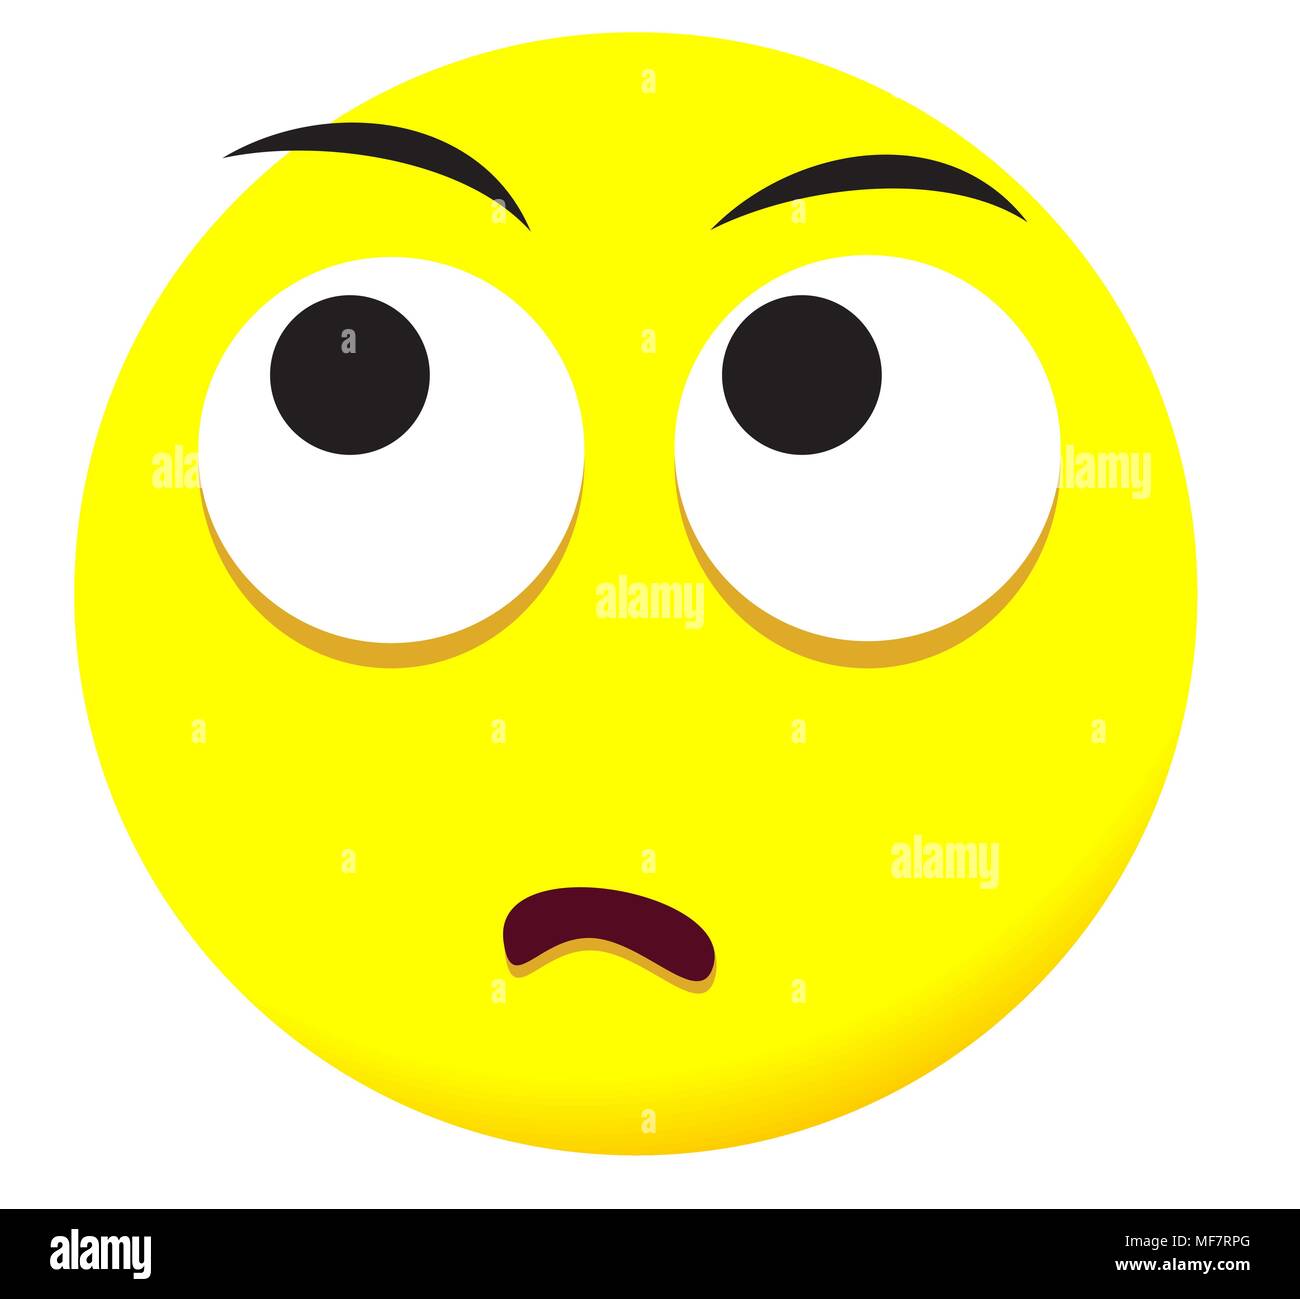 Emoji icon with emotional faces Stock Vector